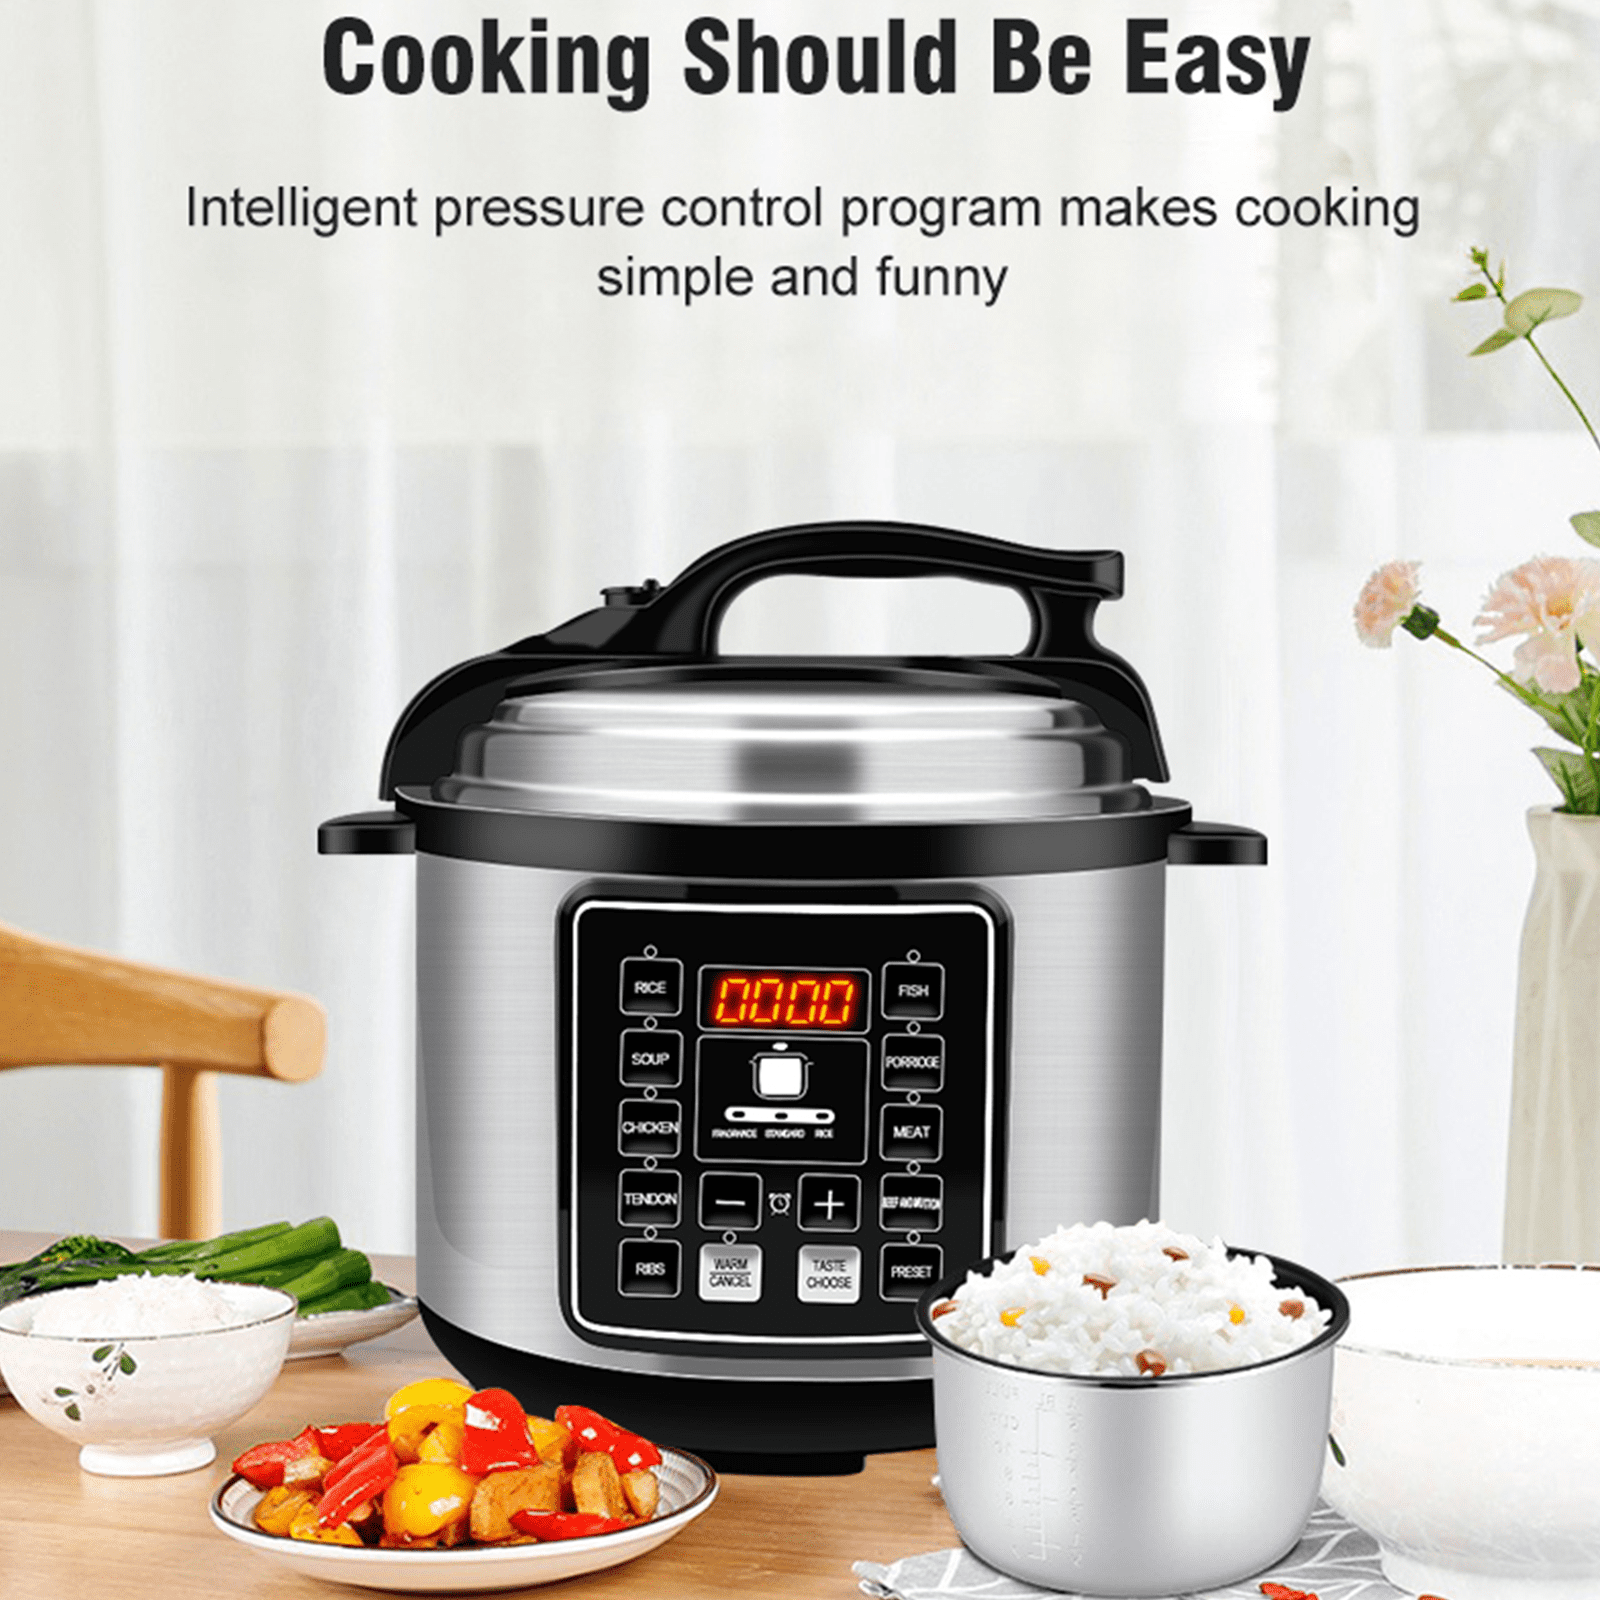 Cook Healthy & Tasty With A Wholesale mini electric pressure